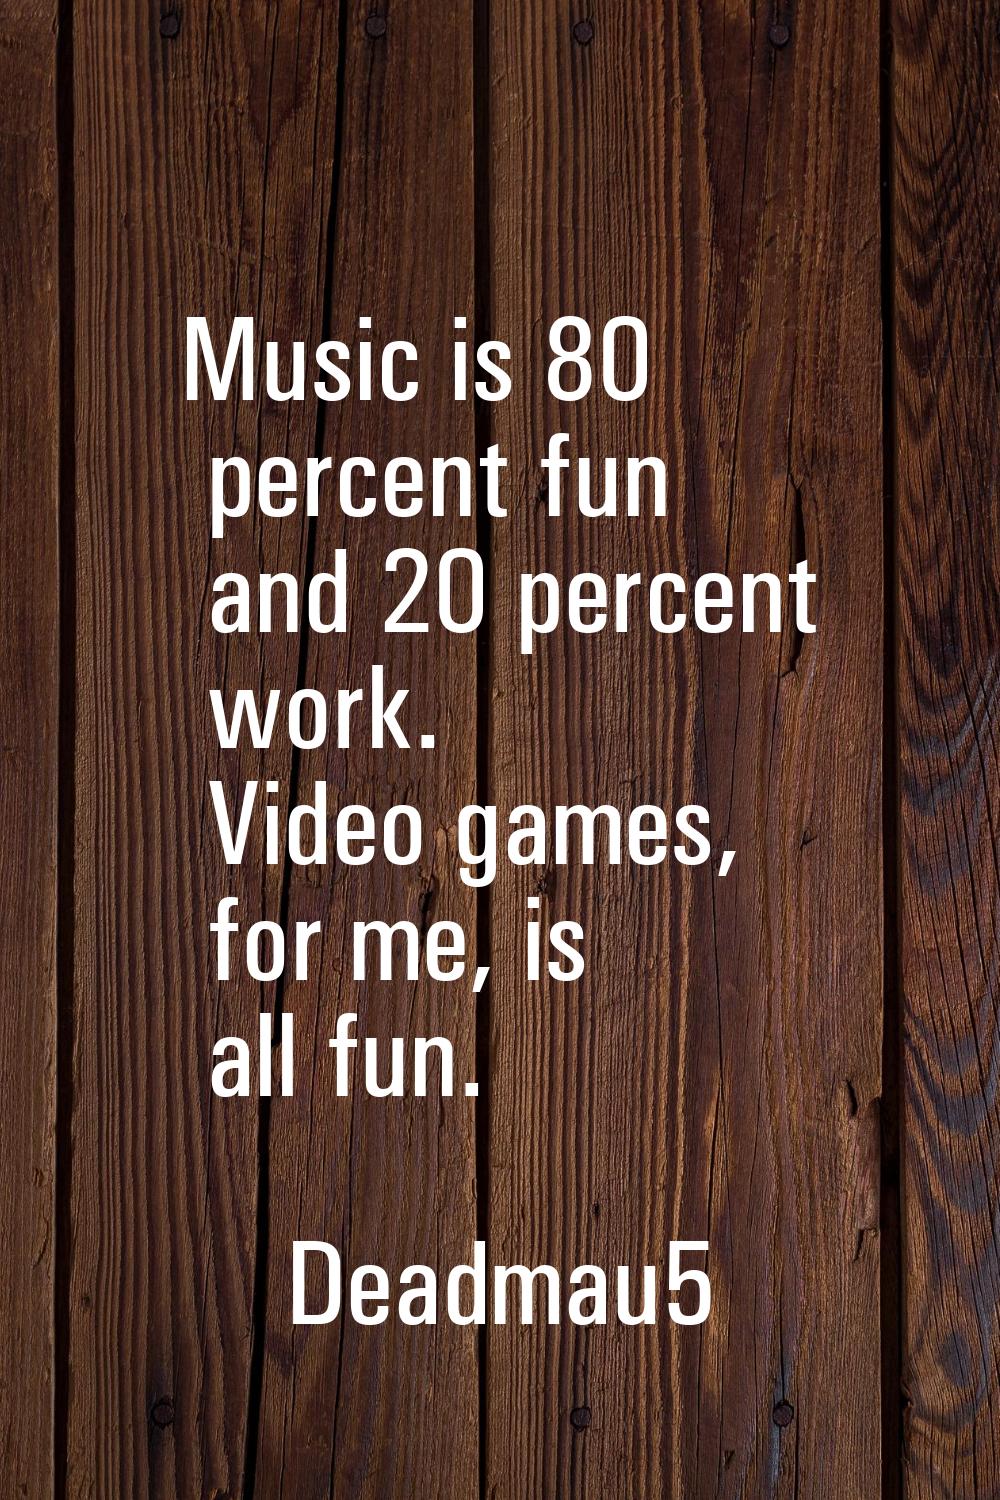 Music is 80 percent fun and 20 percent work. Video games, for me, is all fun.